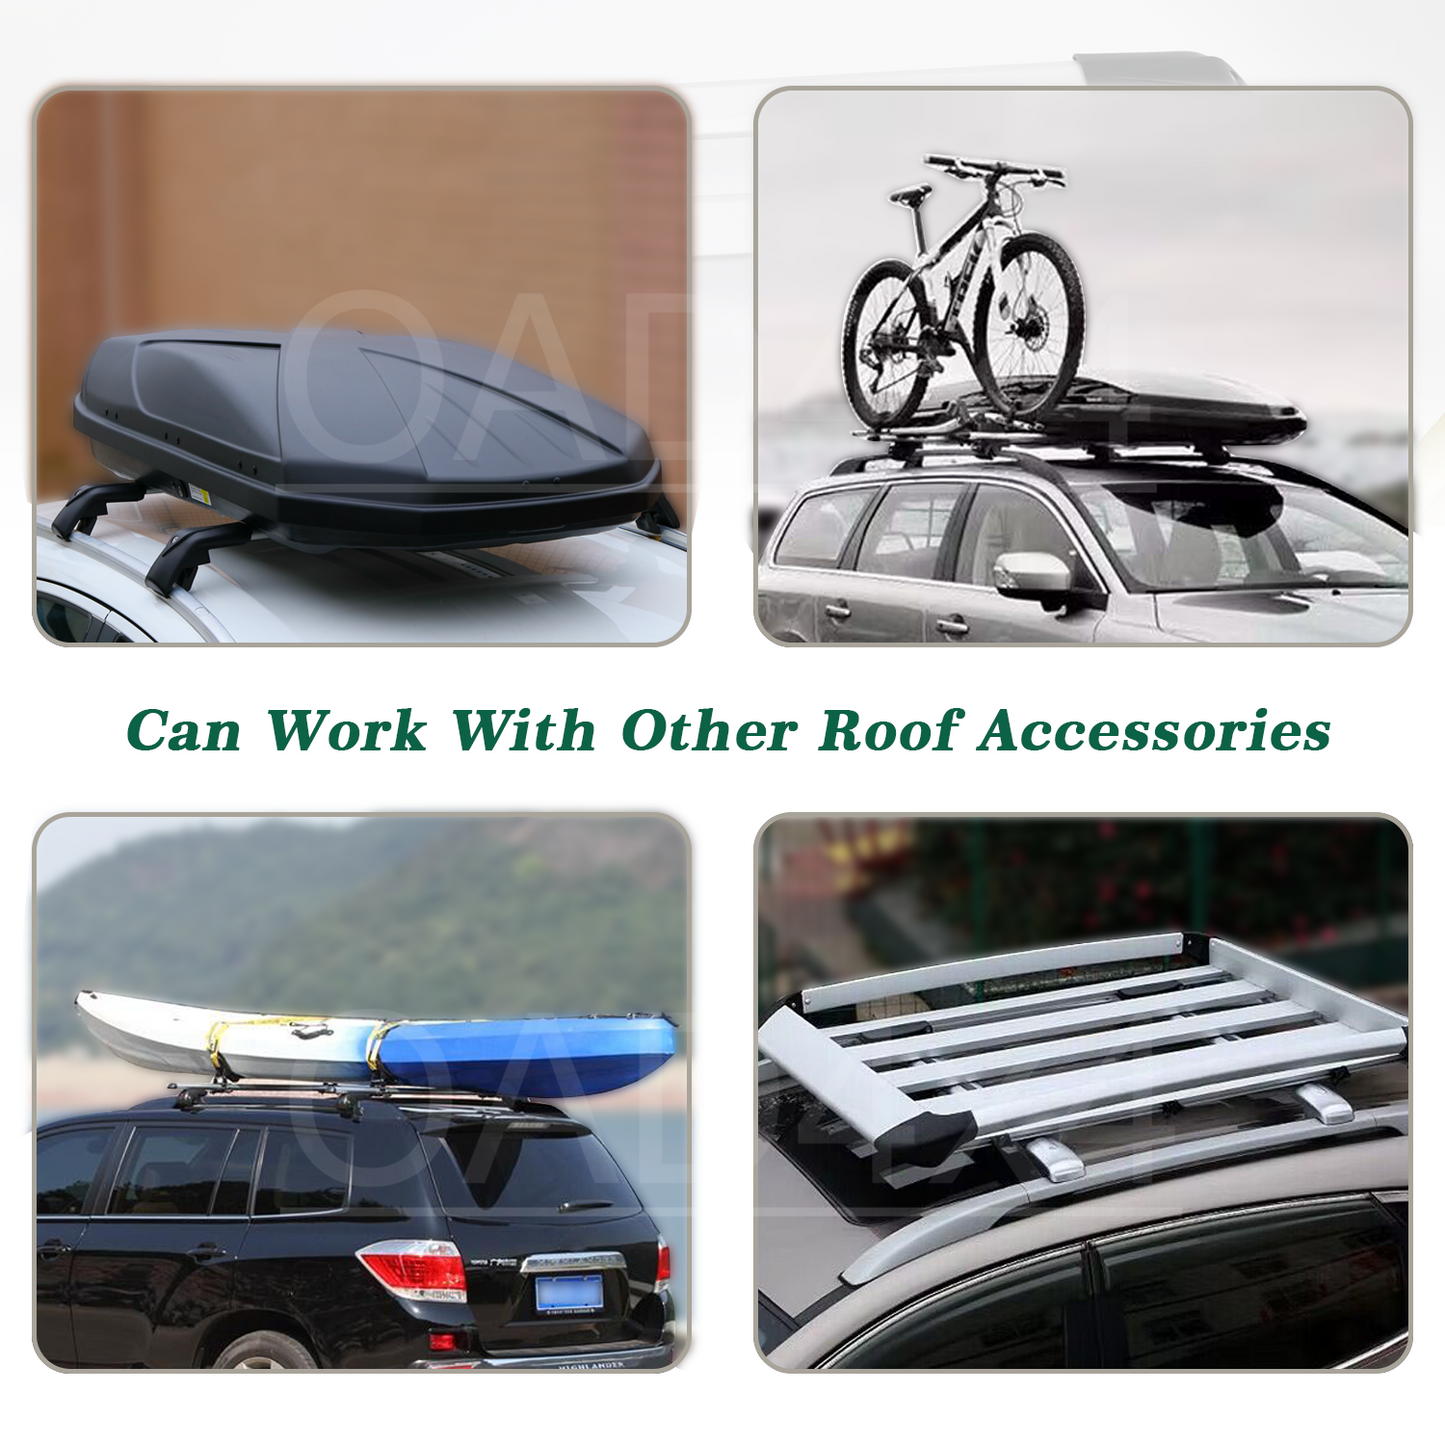 OAD 1 Pair Aluminum Silver Cross Bar Roof Racks Baggage holder for Mercedes-Benz Vito Van 2004-2015 with raised roof rail